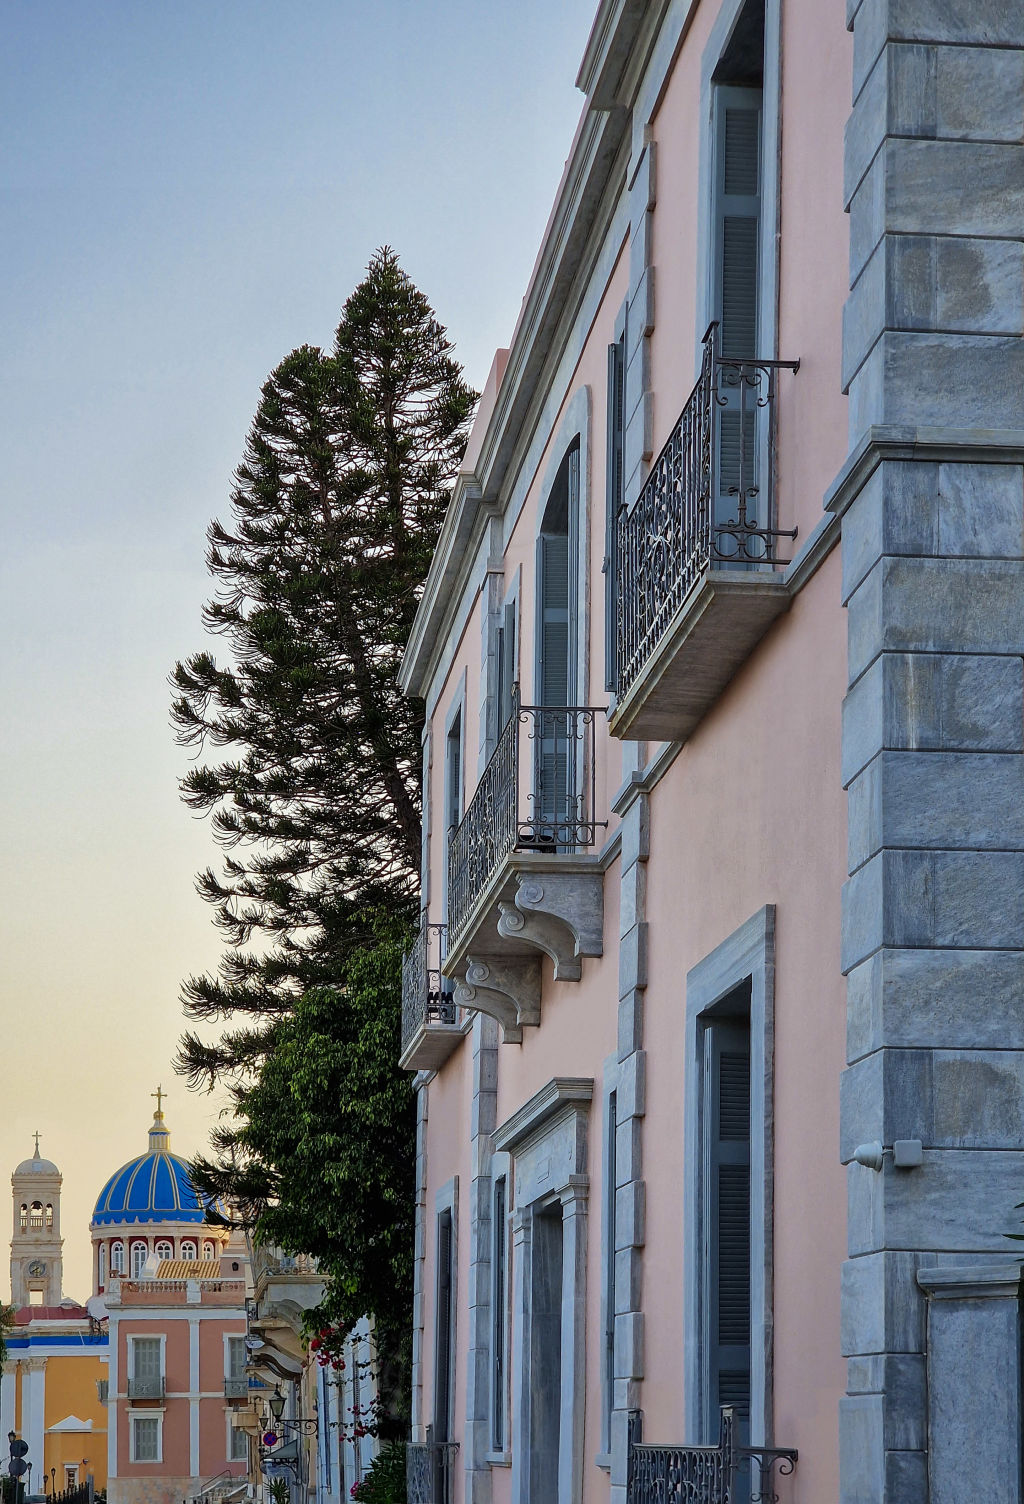 The mansion is located just five minutes from the sea. Photo: Giorgos Alifragis